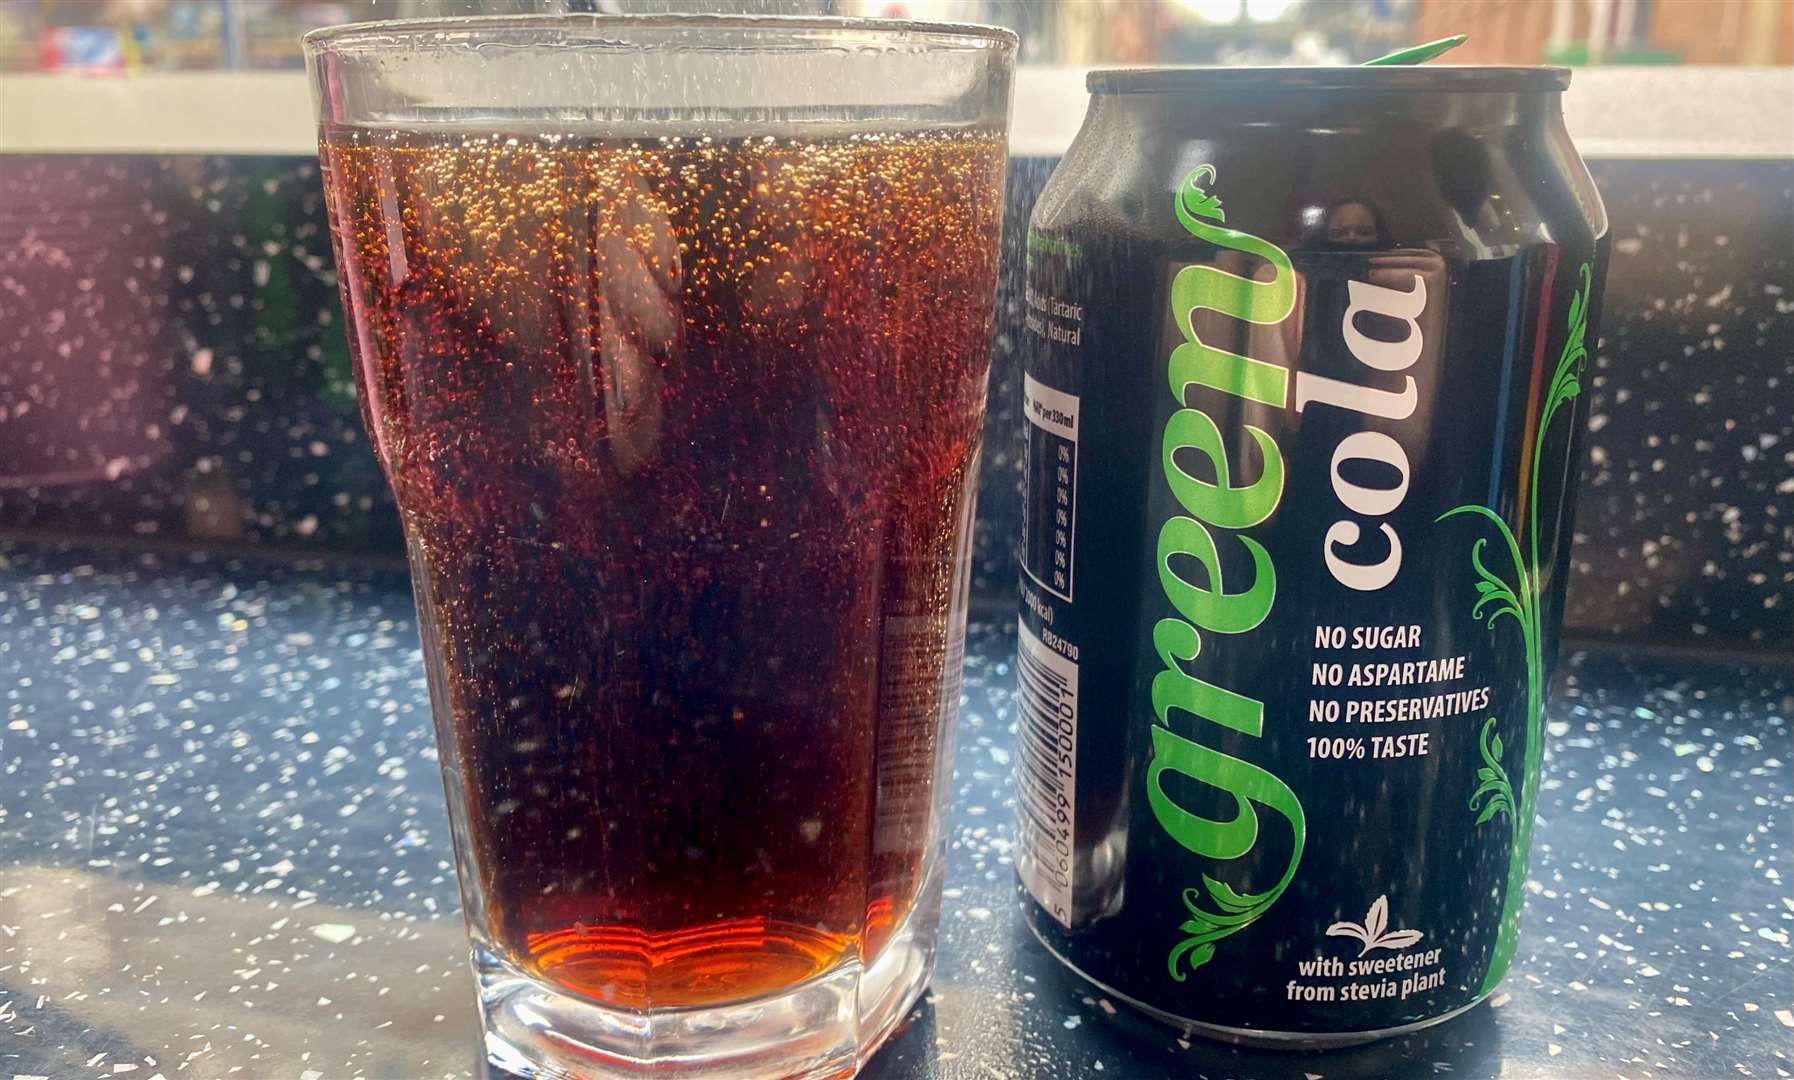 I'd never seen Green Cola before and although I'm a die-hard Diet Coke drinker, this was a good alternative.